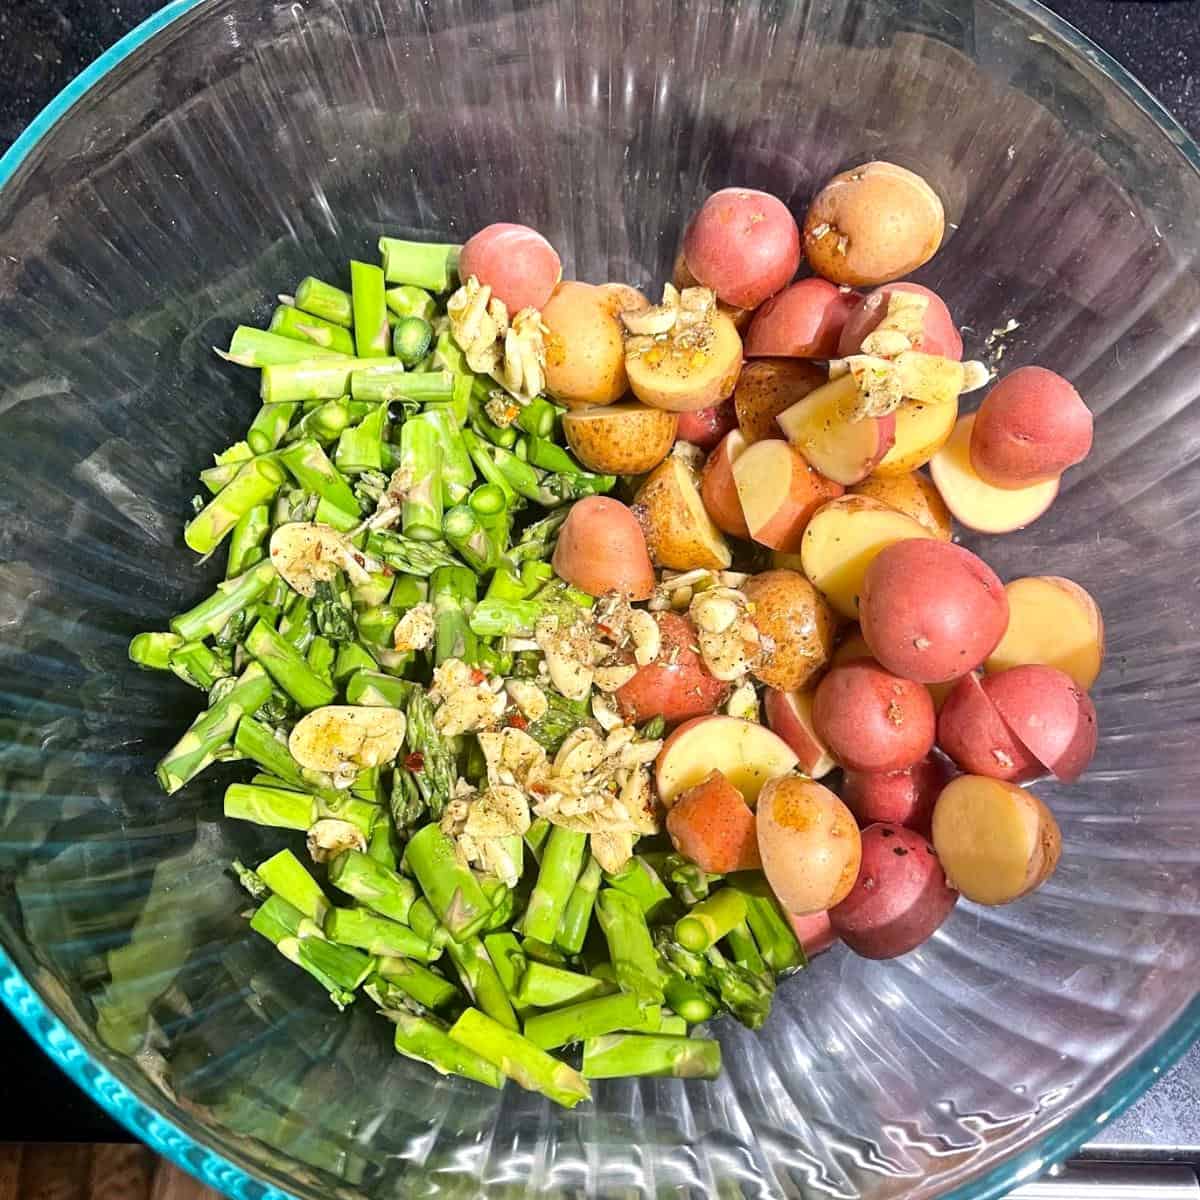 Olive oil dressing added to asparagus and potatoes in bowl.